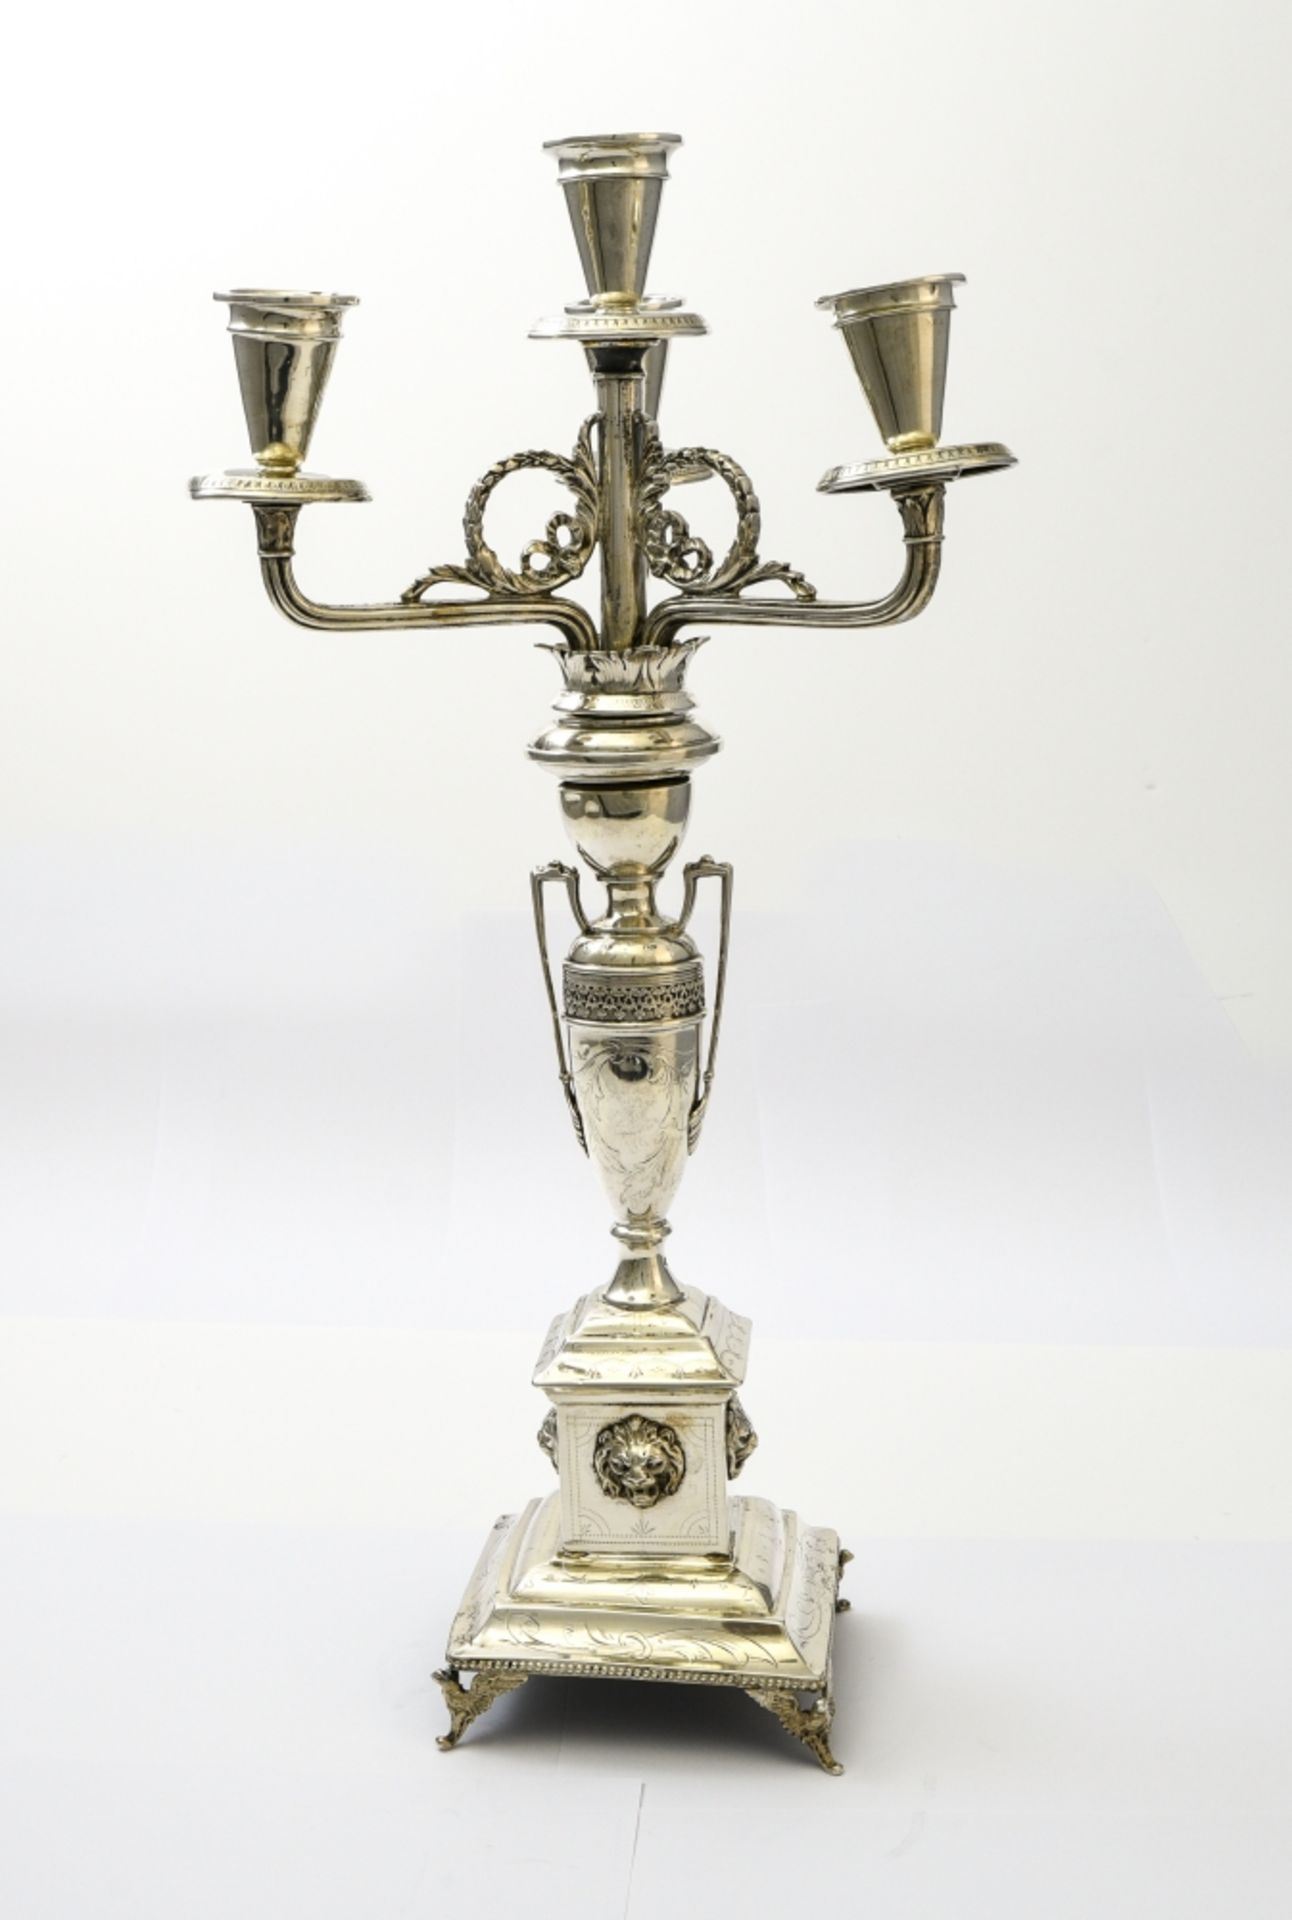 Candelabra VIENNA, SECOND HALF OF THE 19TH CENTURY Silver, with a shaft depicting an amphora vase,